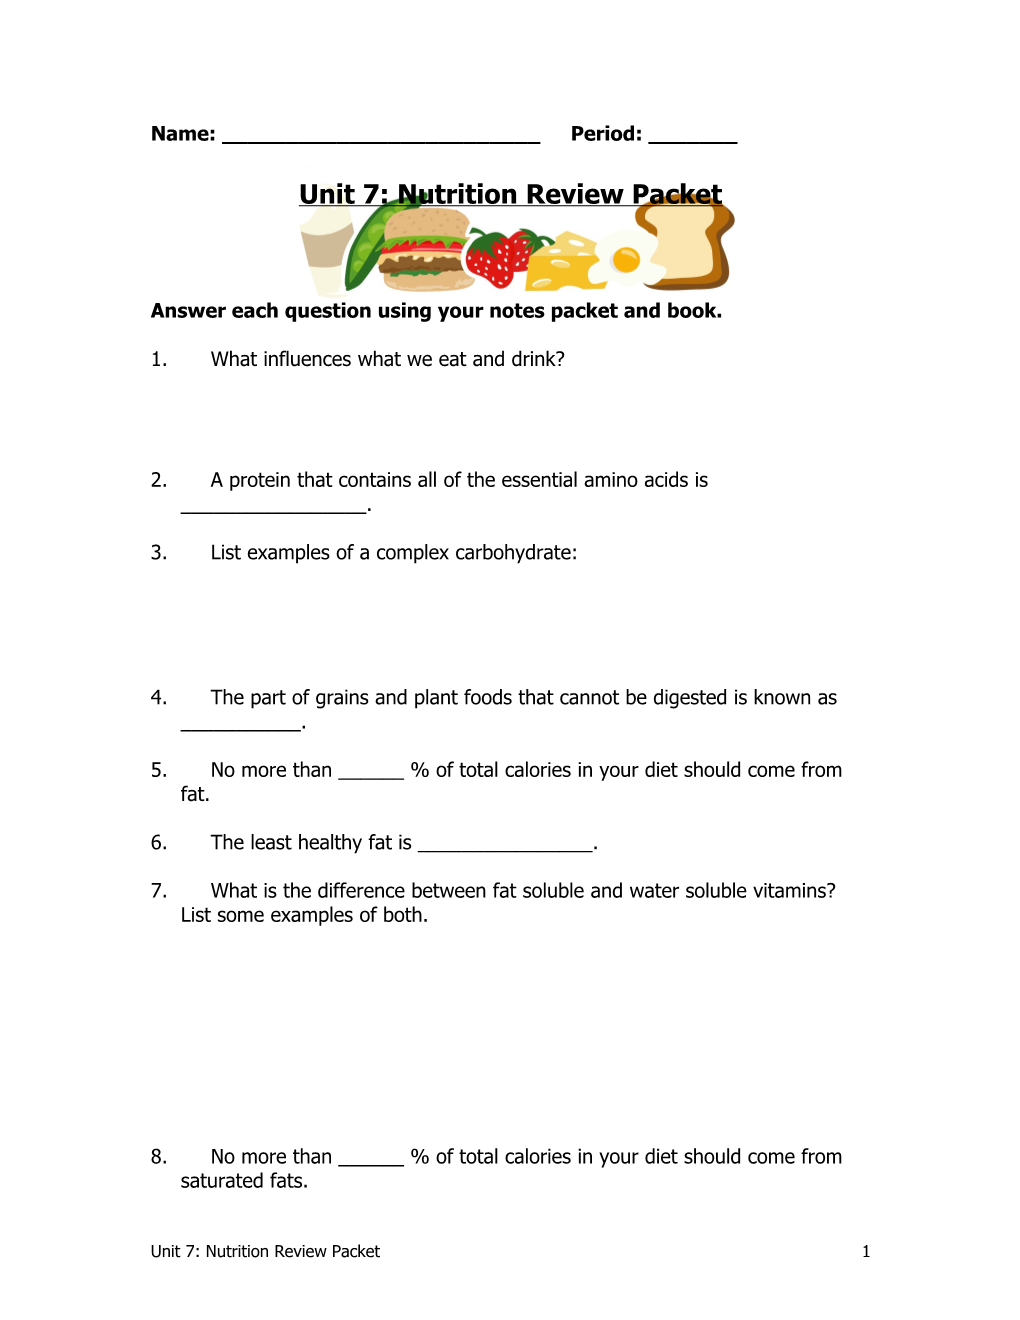 Answer Each Question Using Your Notes Packet and Book